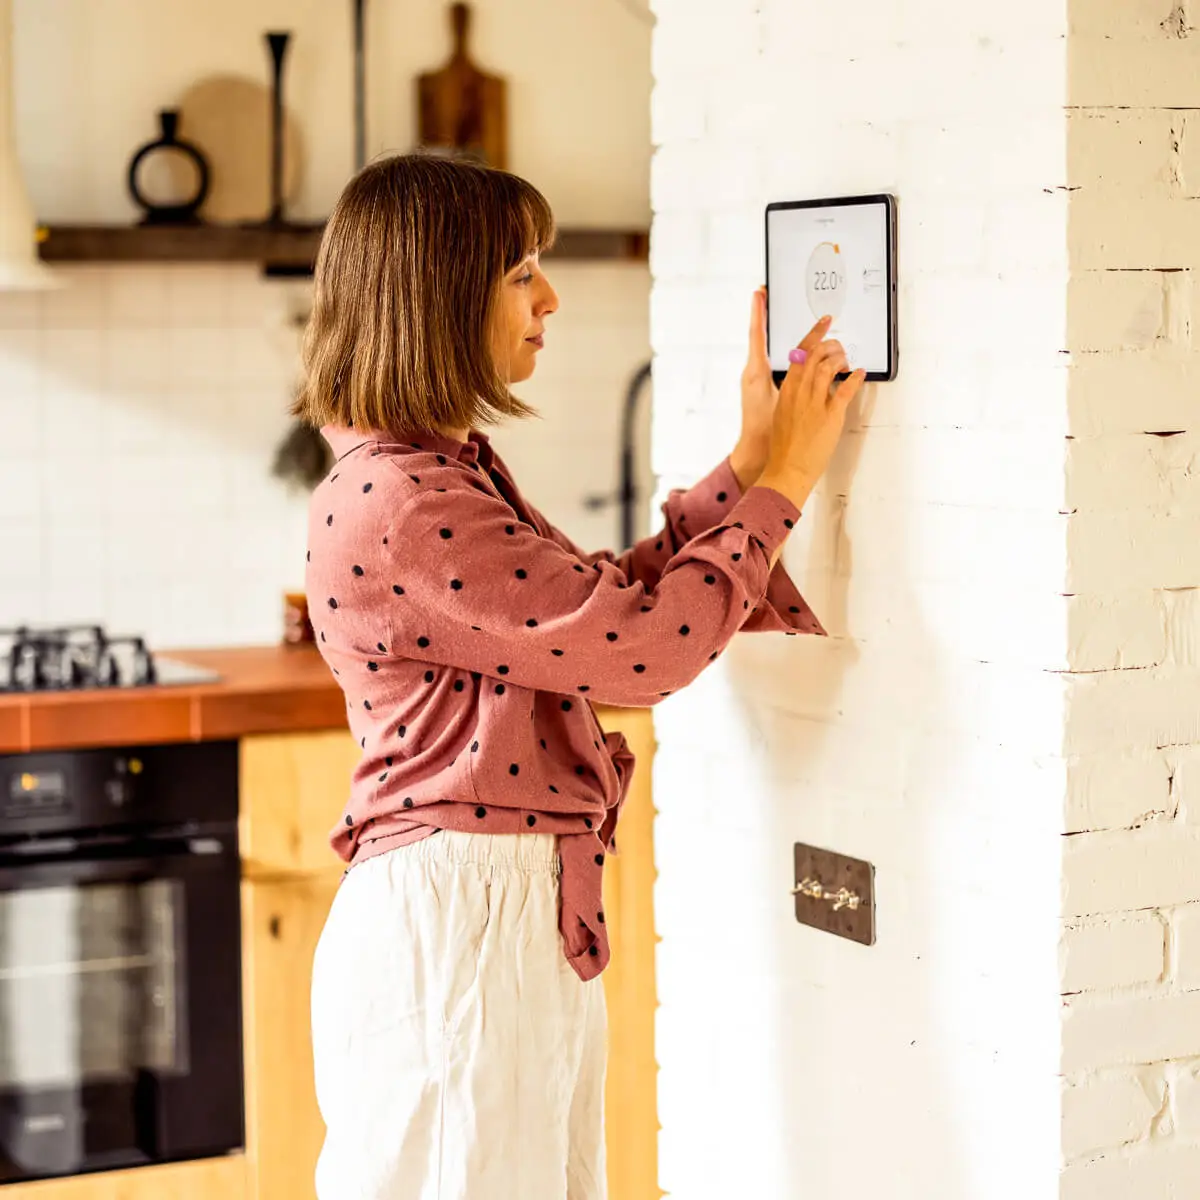 Middle aged woman in pink polka dot shirt, uses touch screen on a tablet mounted to her kitchen wall to adjust the temperature via her ducted air conditioning system.